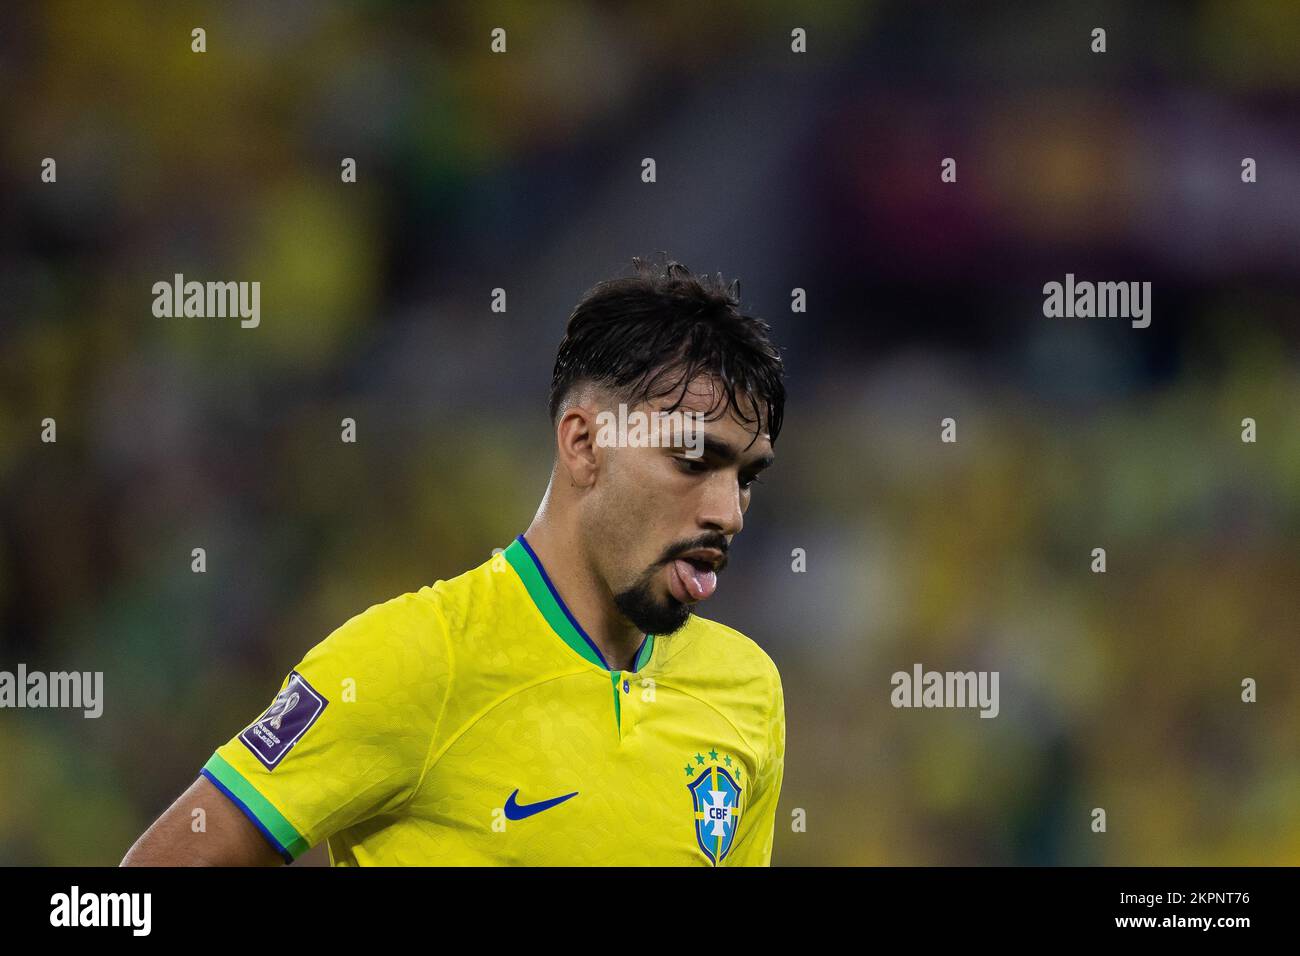 Qatar - Doha - 11/28/2022 - 2022 WORLD CUP, BRAZIL X SWITZERLAND - Lucas Paqueta player of Brazil during a match against Switzerland at stadium 974 for the 2022 World Cup championship. Photo: Pedro Martins/AGIF/Sipa USA Stock Photo